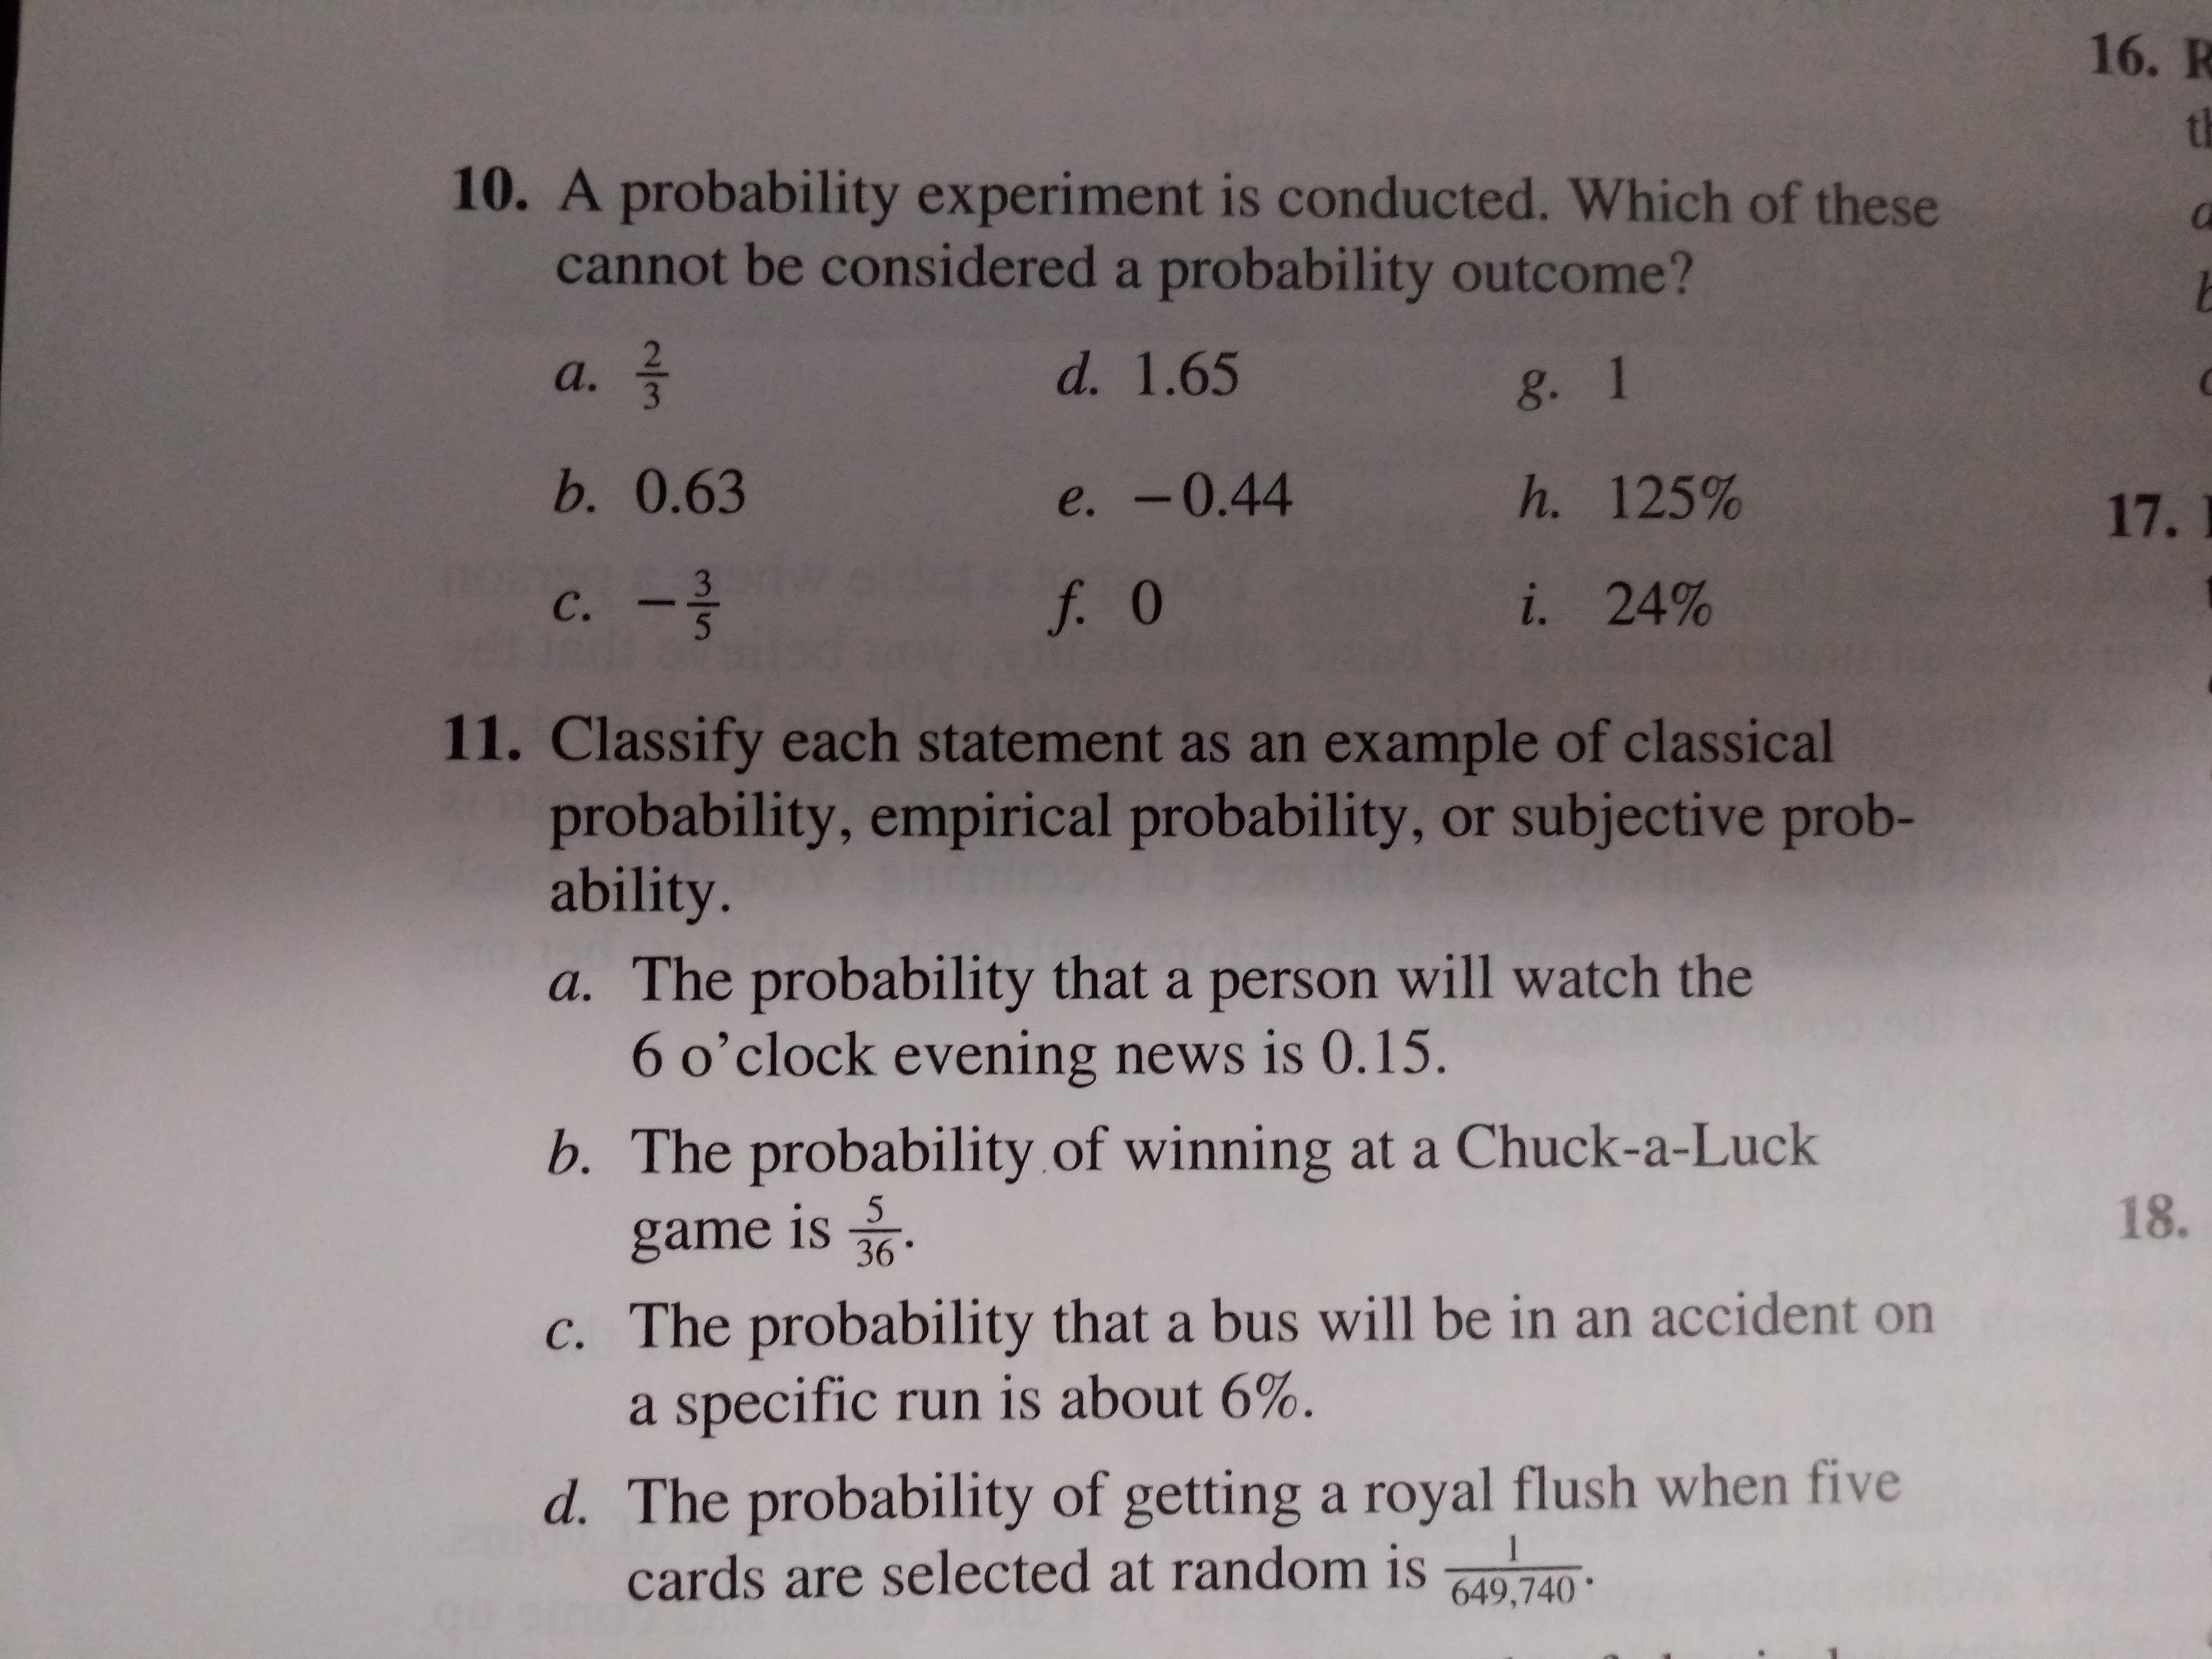 16. R
th
10. A probability experiment is conducted. Which of these
cannot be considered a probability outcome?
d. 1.65
а.
g. 1
b. 0.63
h. 125%
e. -0.44
17.
3
i. 24%
f. 0
с.
11. Classify each statement as an example of classical
probability, empirical probability, or subjective prob-
ability.
a. The probability that a person will watch the
6 o'clock evening news is O.15.
b. The probability of winning at a Chuck-a-Luck
18.
5
game is
36
c. The probability that a bus will be in an accident on
a specific run is about 6%.
d. The probability of gettinga royal flush when five
cards are selected at random is
1
649,740
